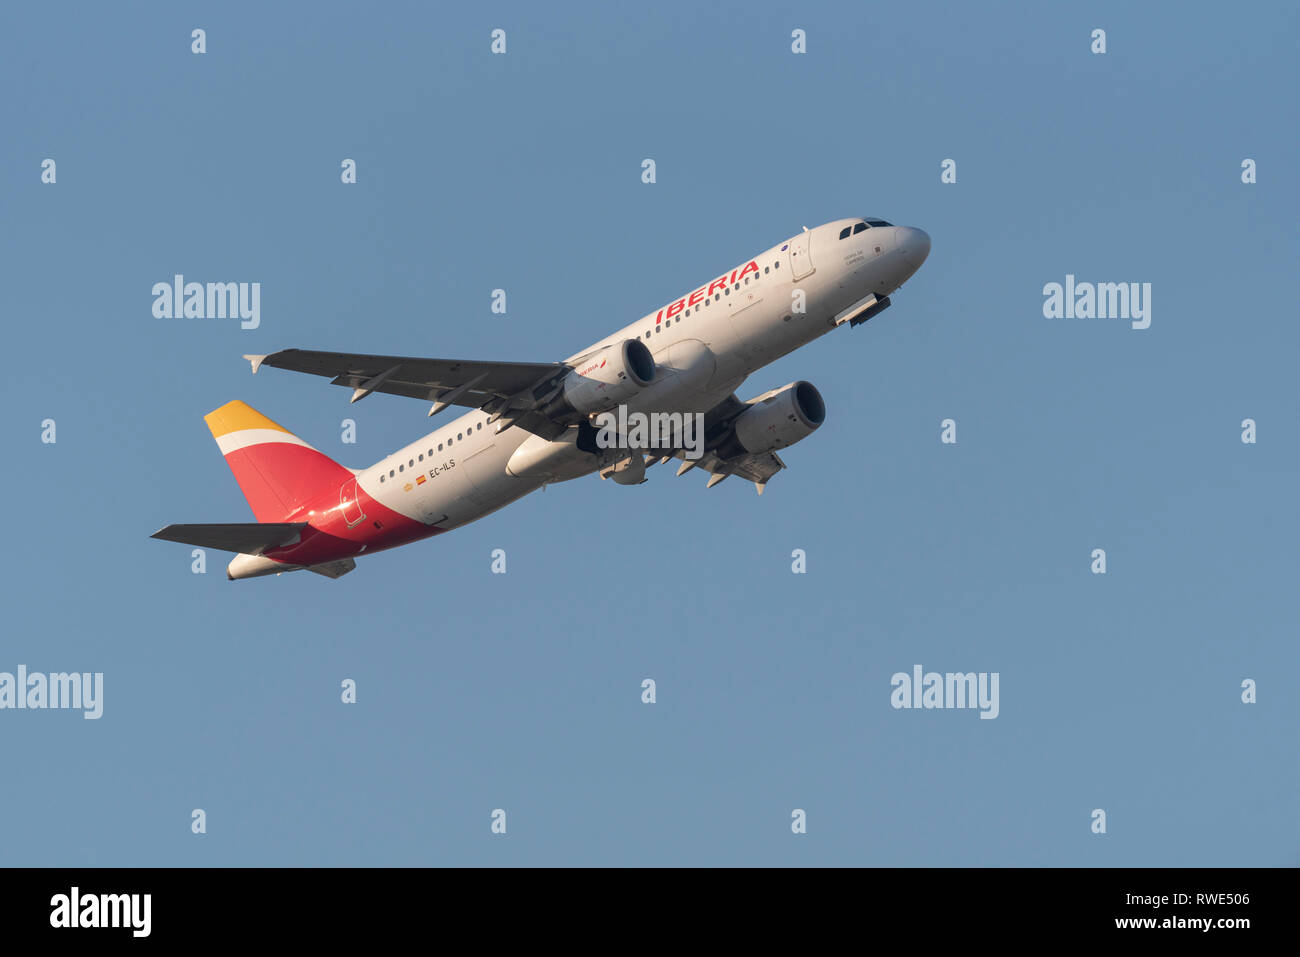 Iberia Airbus A320 jet plane airliner EC-ILS taking off from London Heathrow Airport, UK, in blue sky. Named Sierra de Cameros Stock Photo